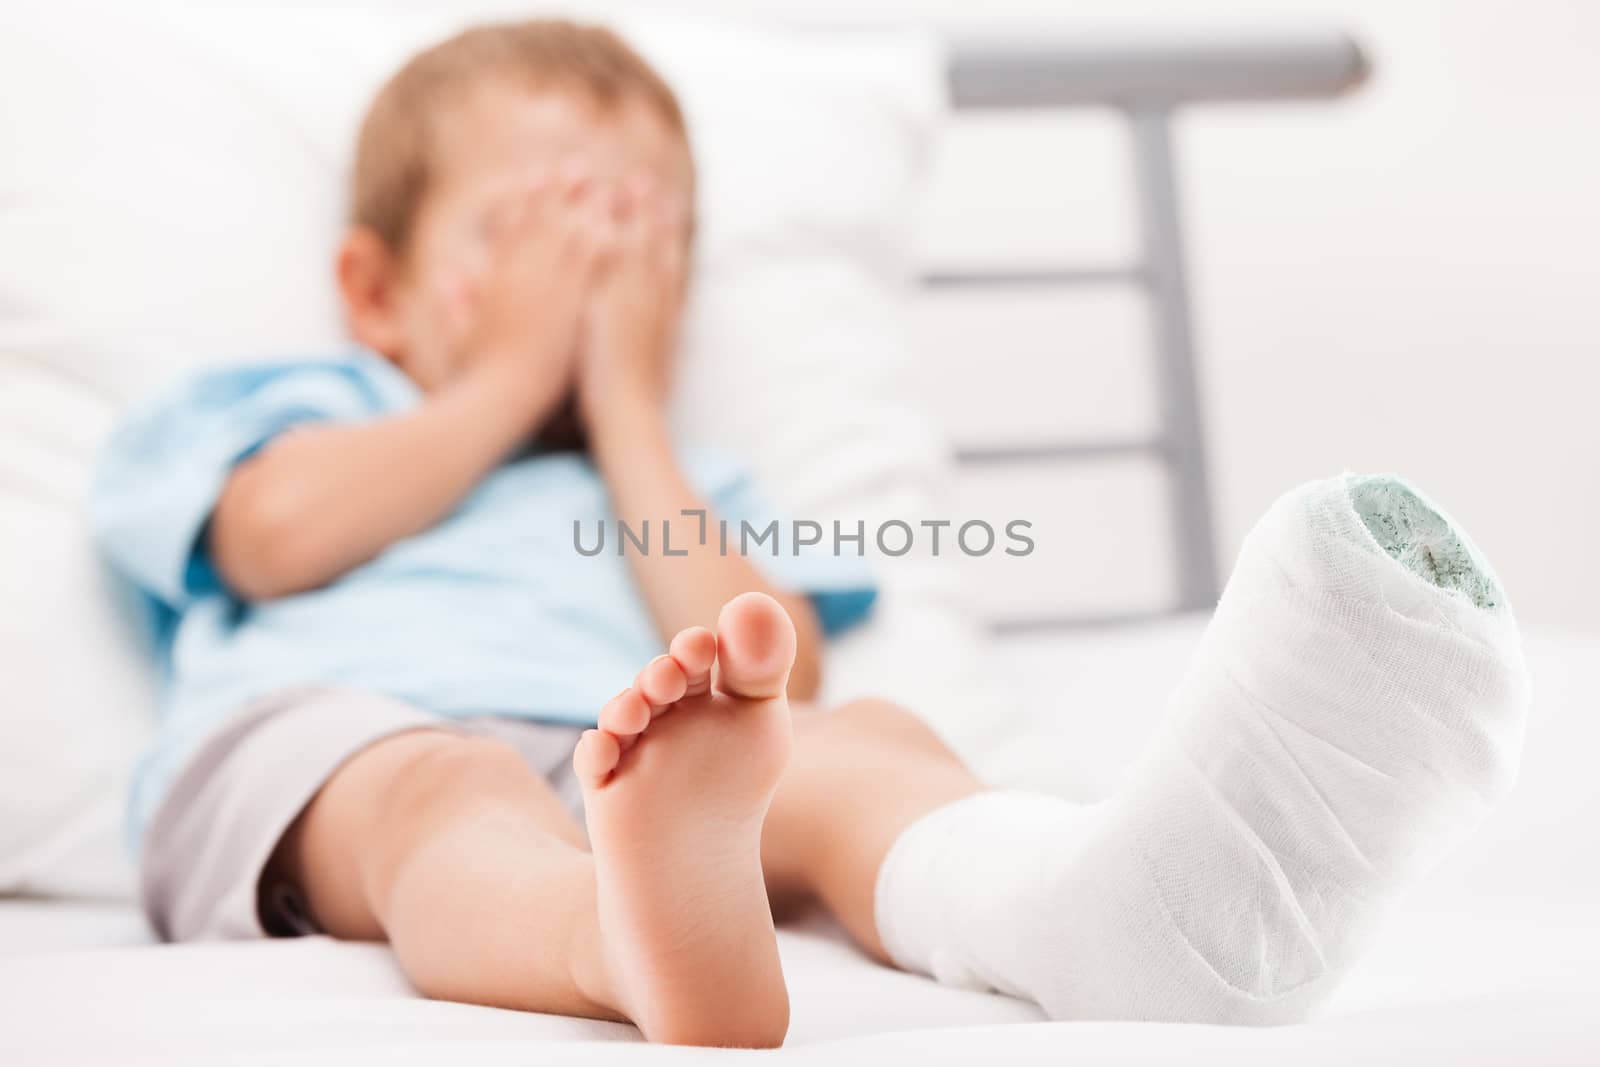 Little child boy with plaster bandage on leg heel fracture or br by ia_64